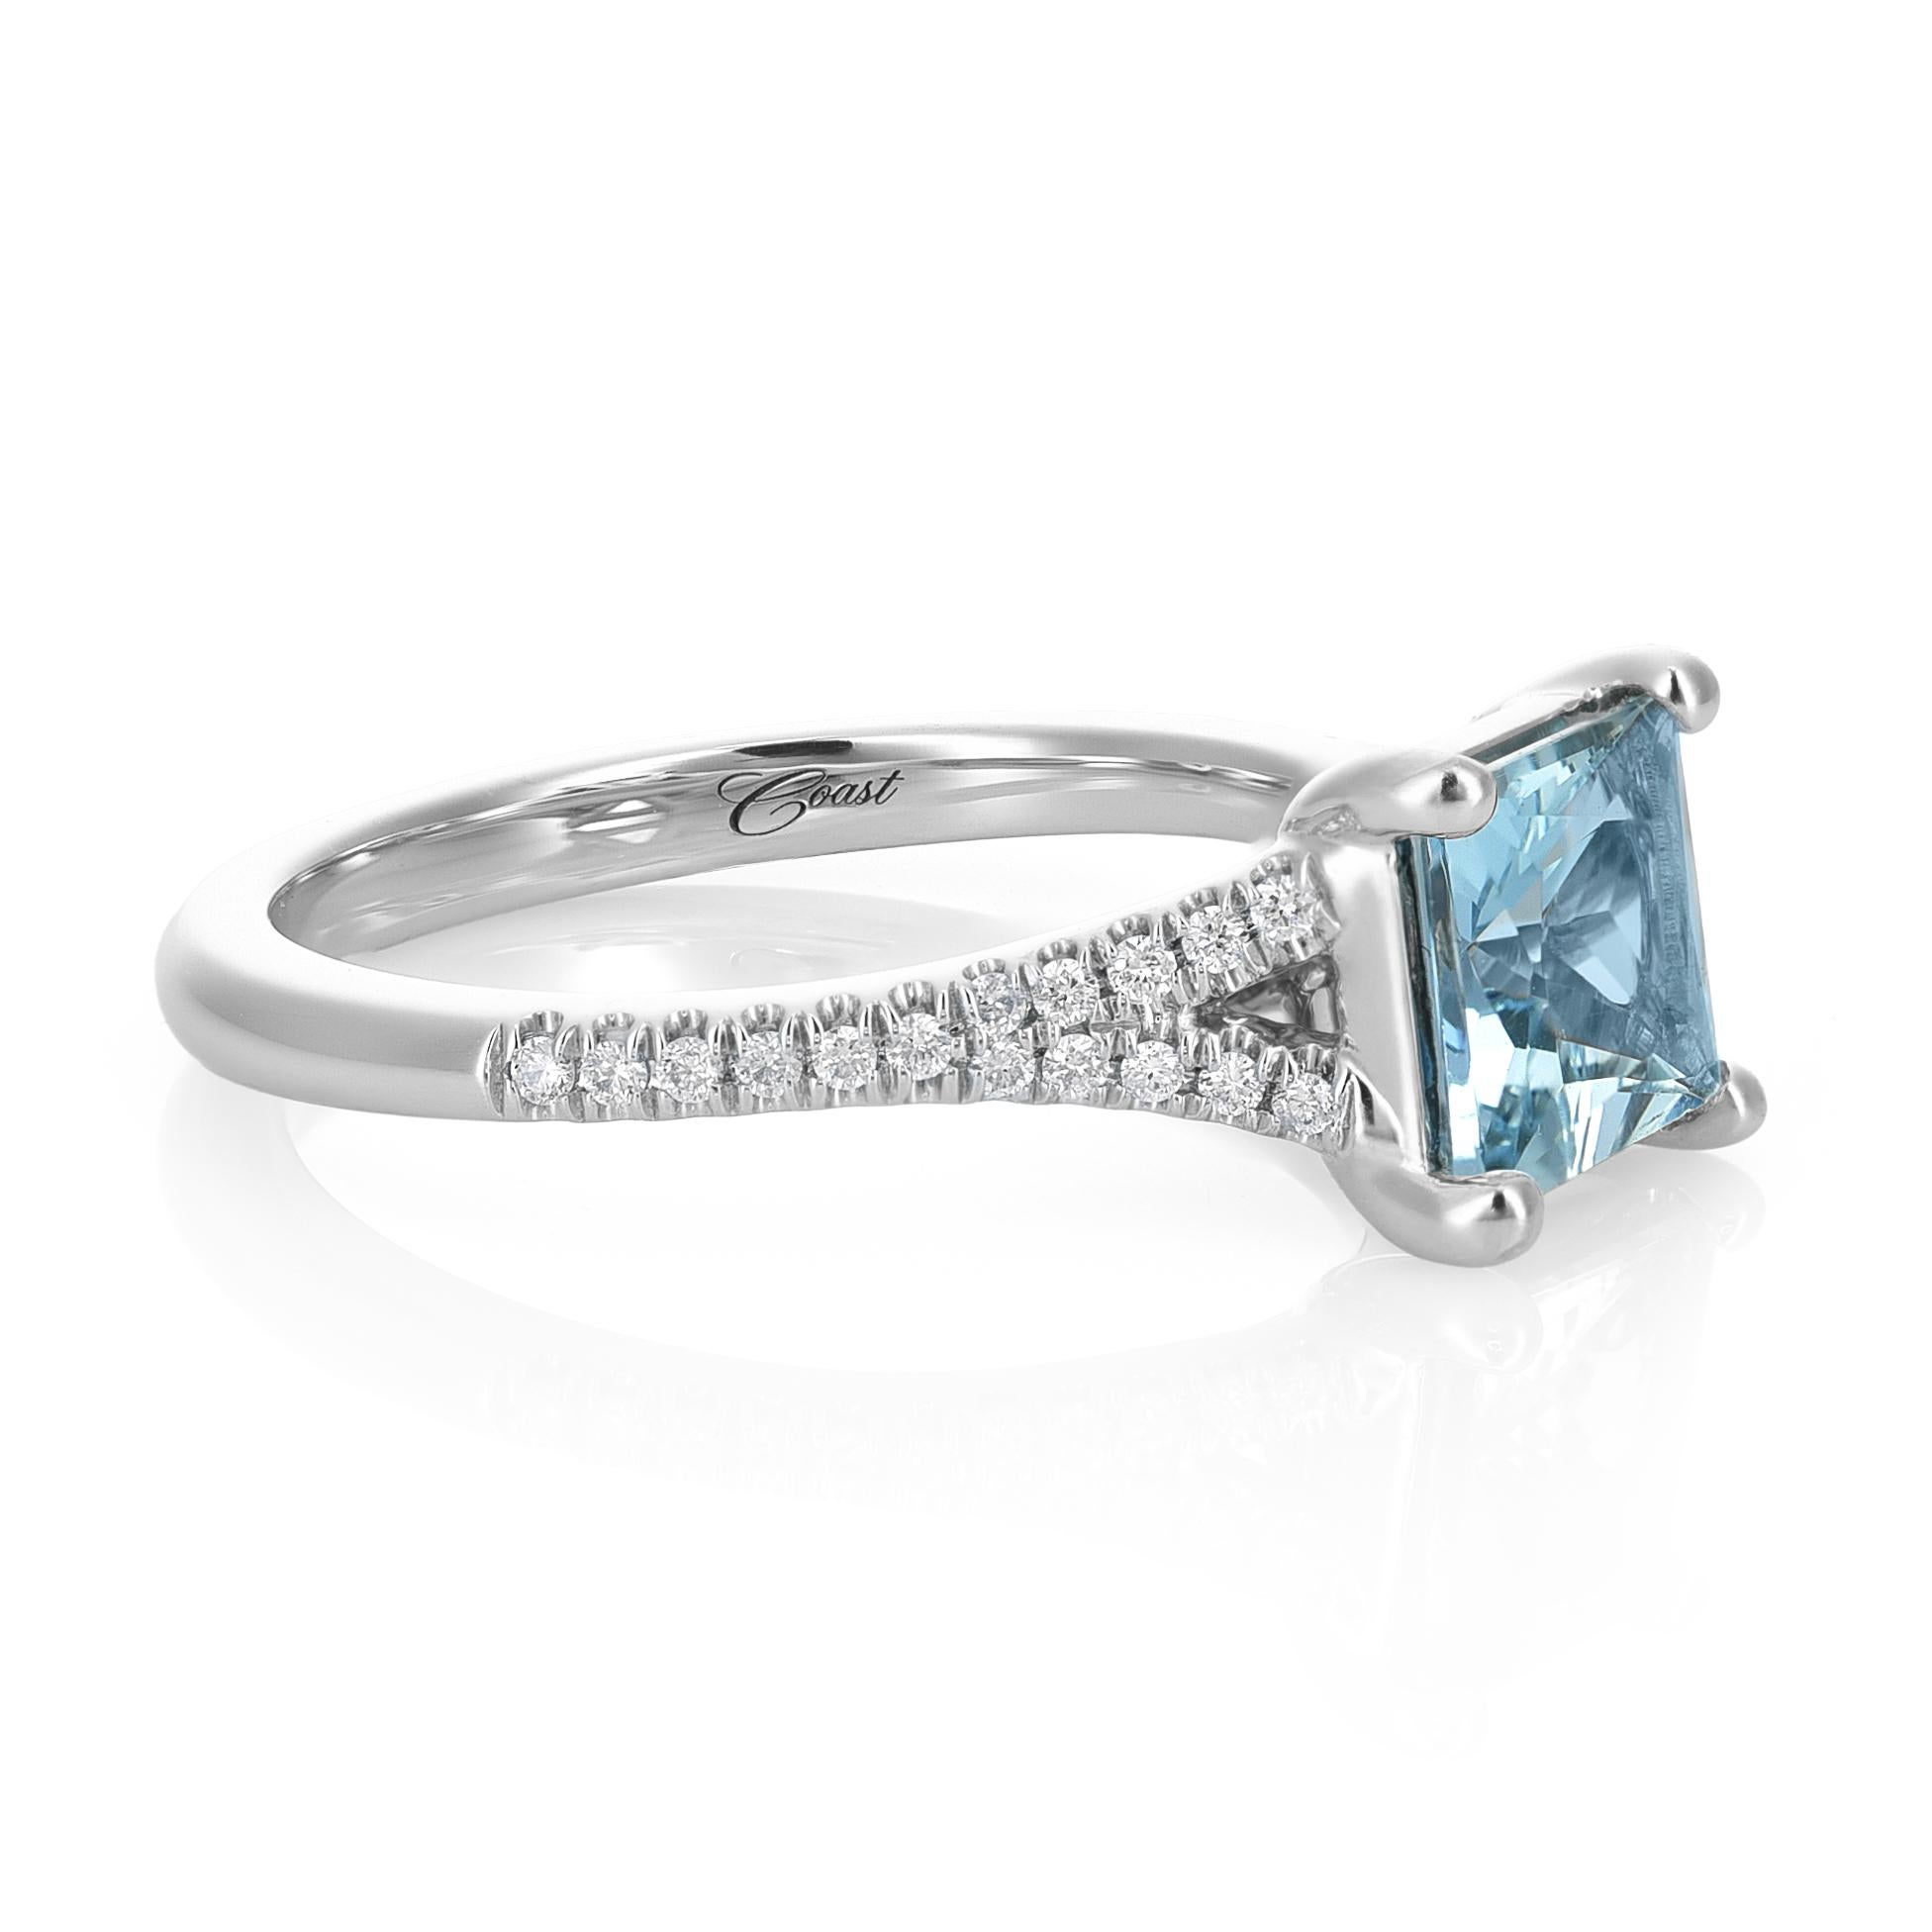 Introducing a captivating ensemble, this 14KW Gold Ring showcases a stunning Natural Aquamarine of 1.43 carats in a resplendent Princess cut. The intricate arrangement of 0.14 carats of Diamonds around the Aquamarine adds a touch of brilliance to